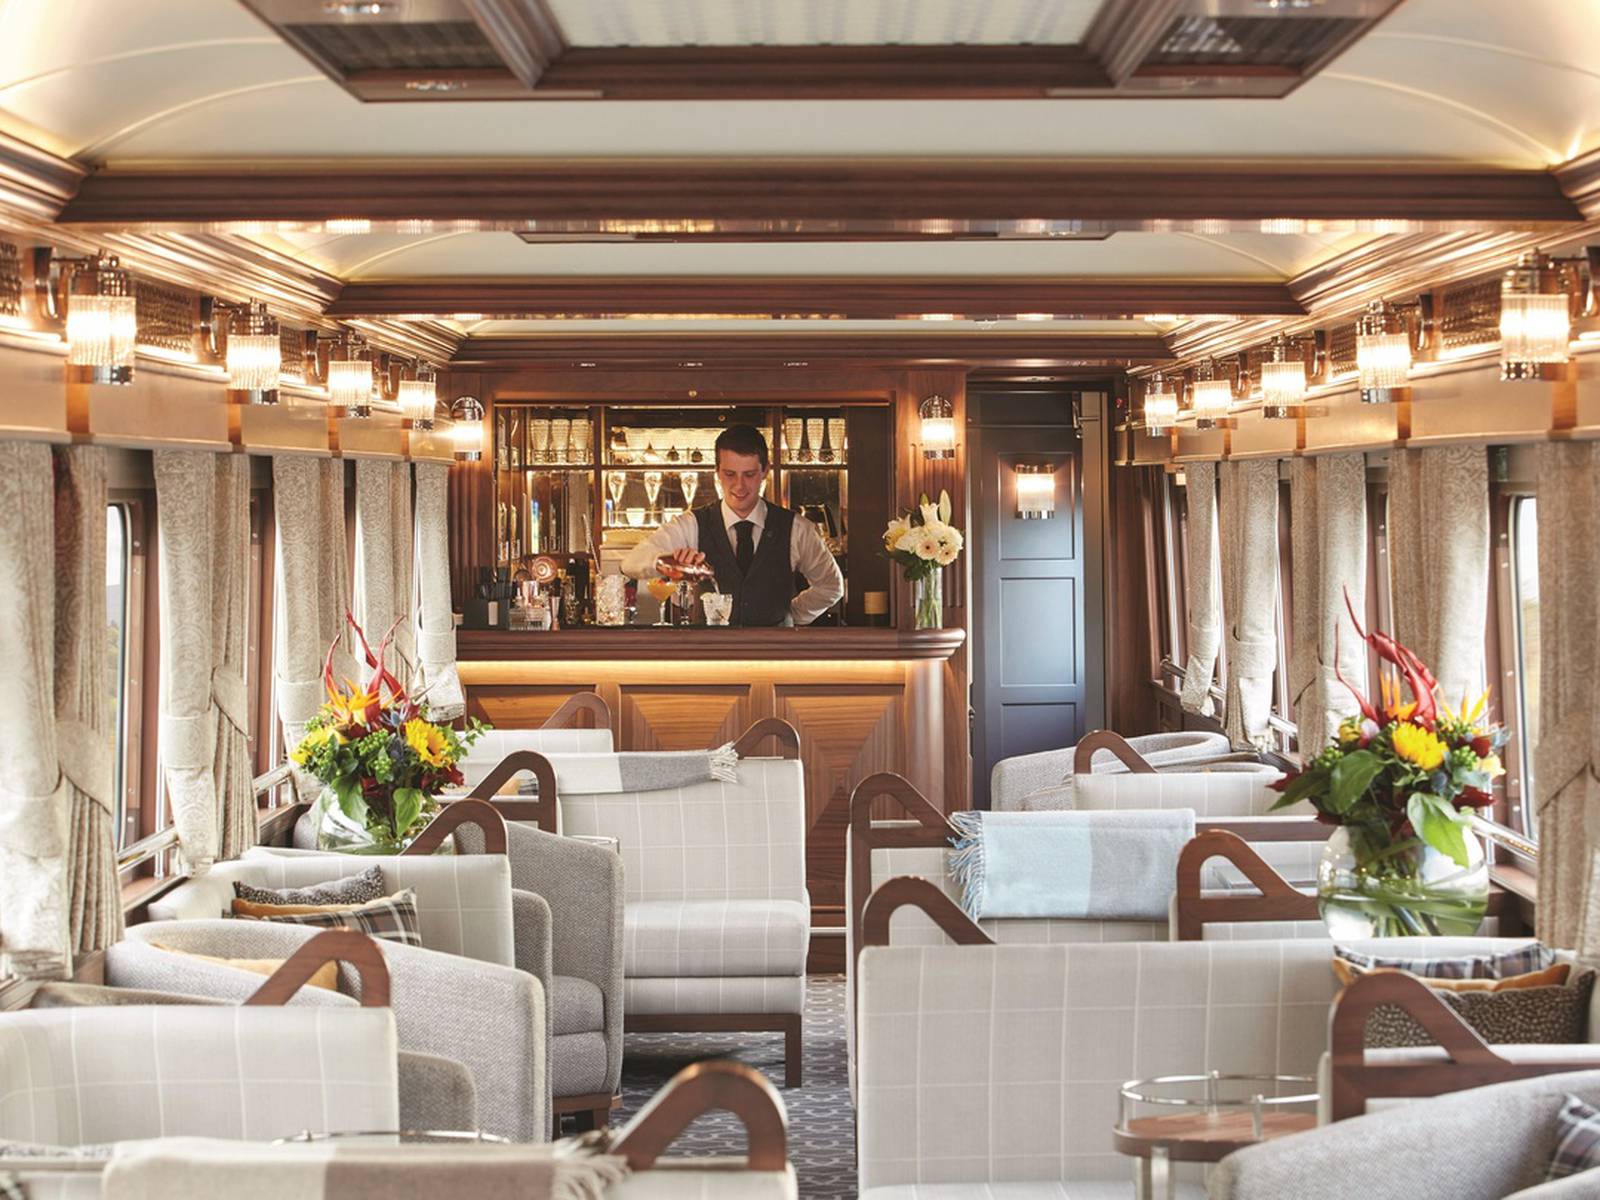 All aboard the €3,000 luxury train. Is it worth the money? – The Irish Times